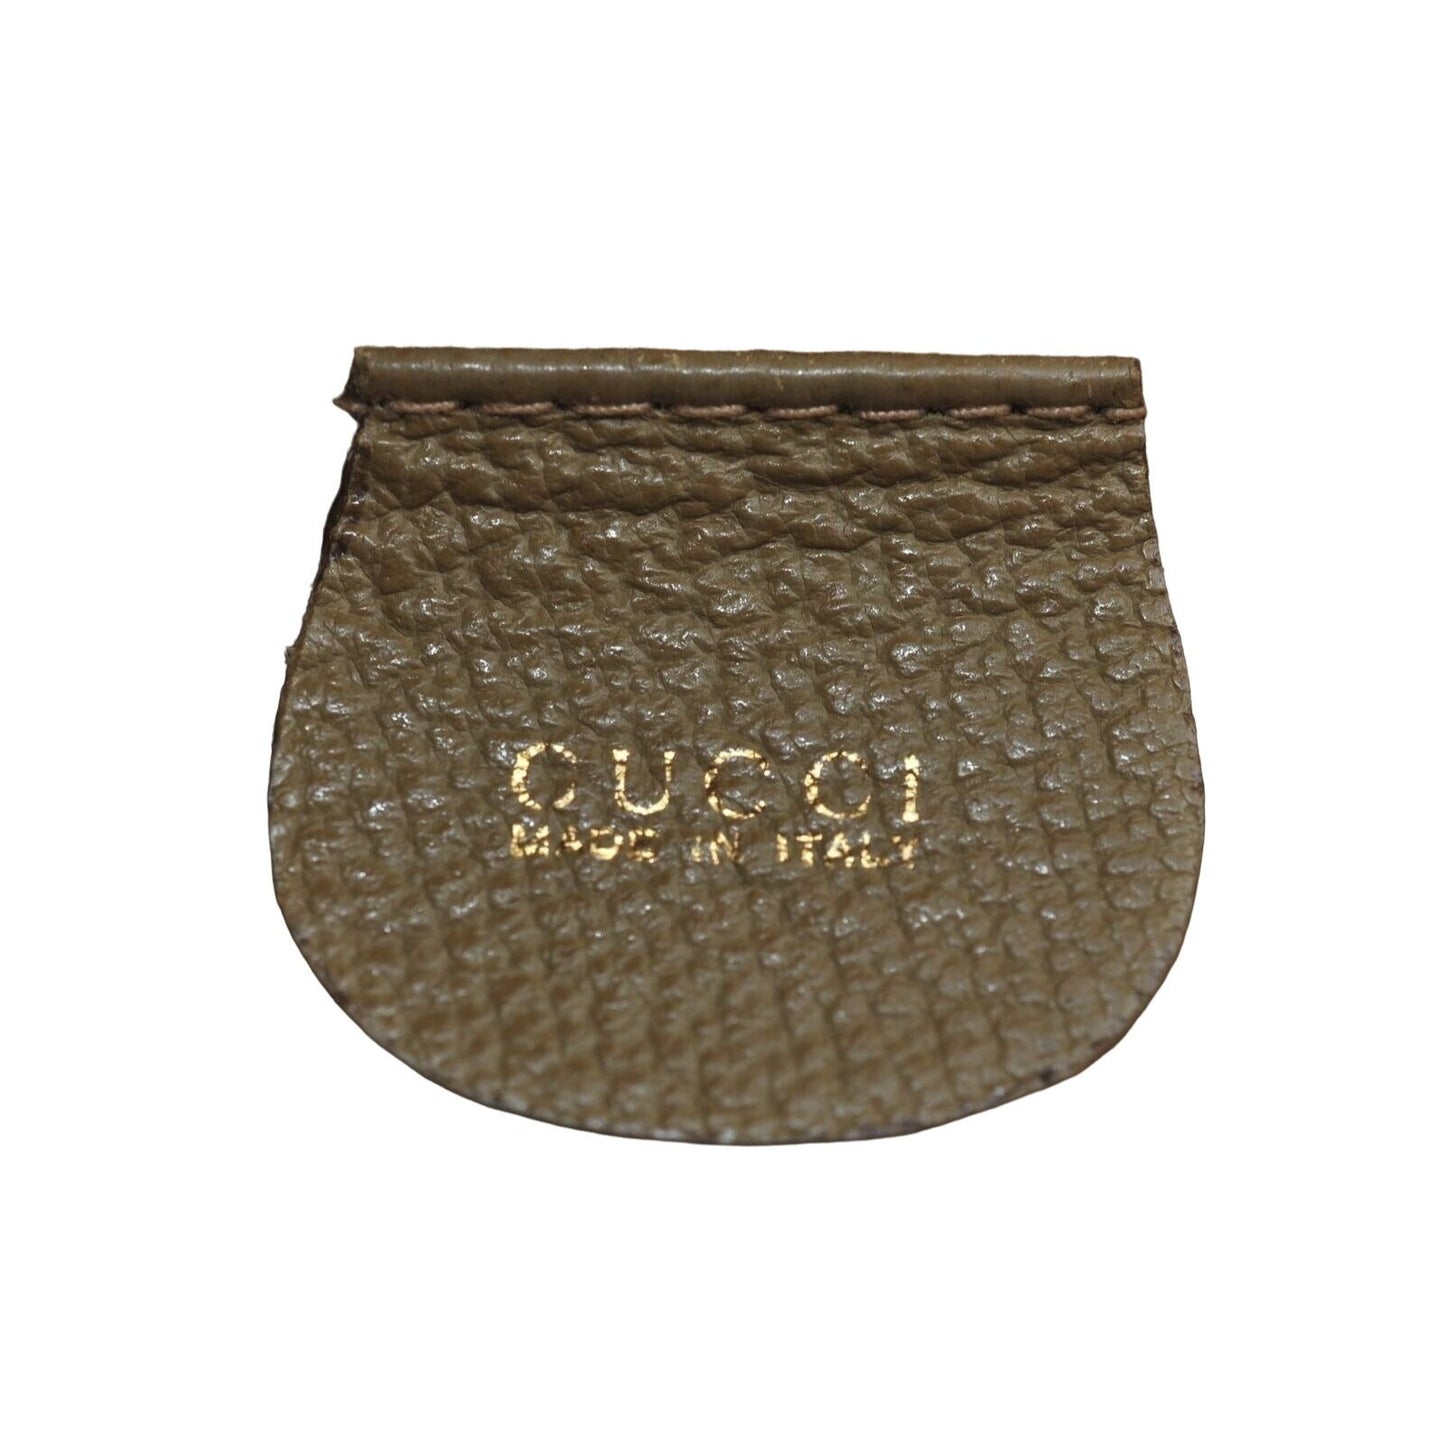 Gucci Stirrup style olive green suede and leather saddle bag cross body or shoulder bag with a gold stirrup accent!